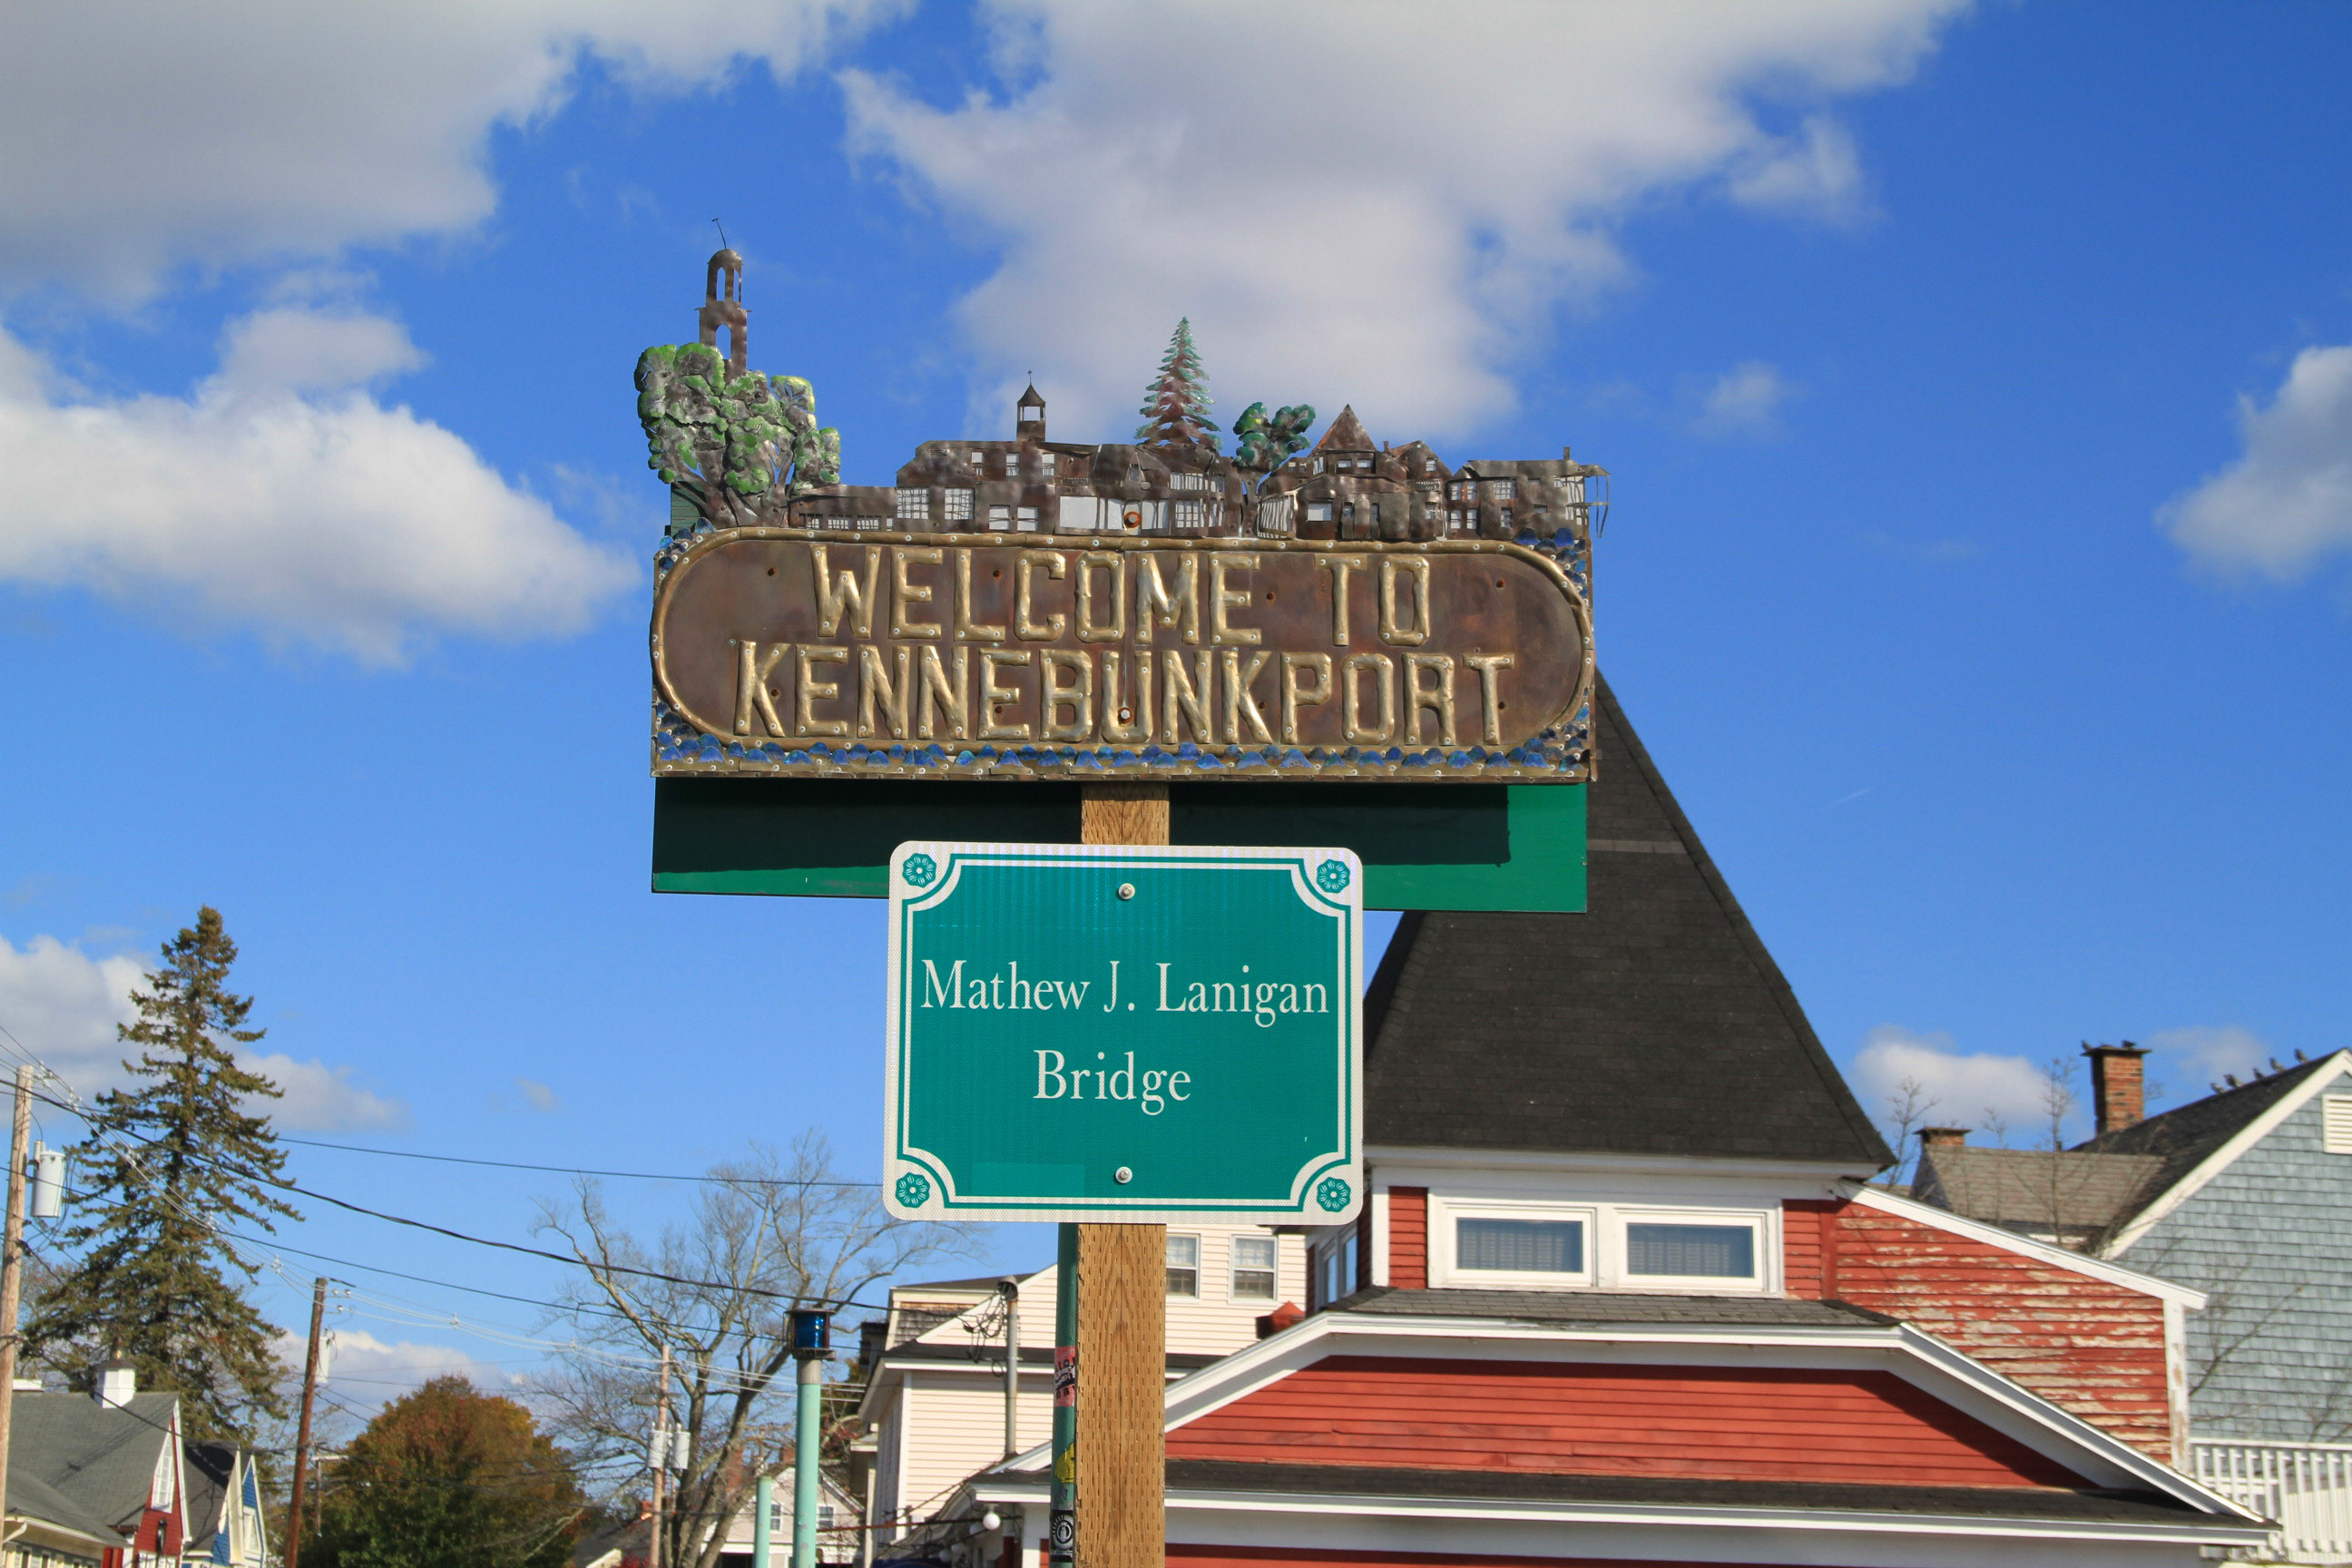 How Exactly Do You Pronounce Kennebunk, Maine?